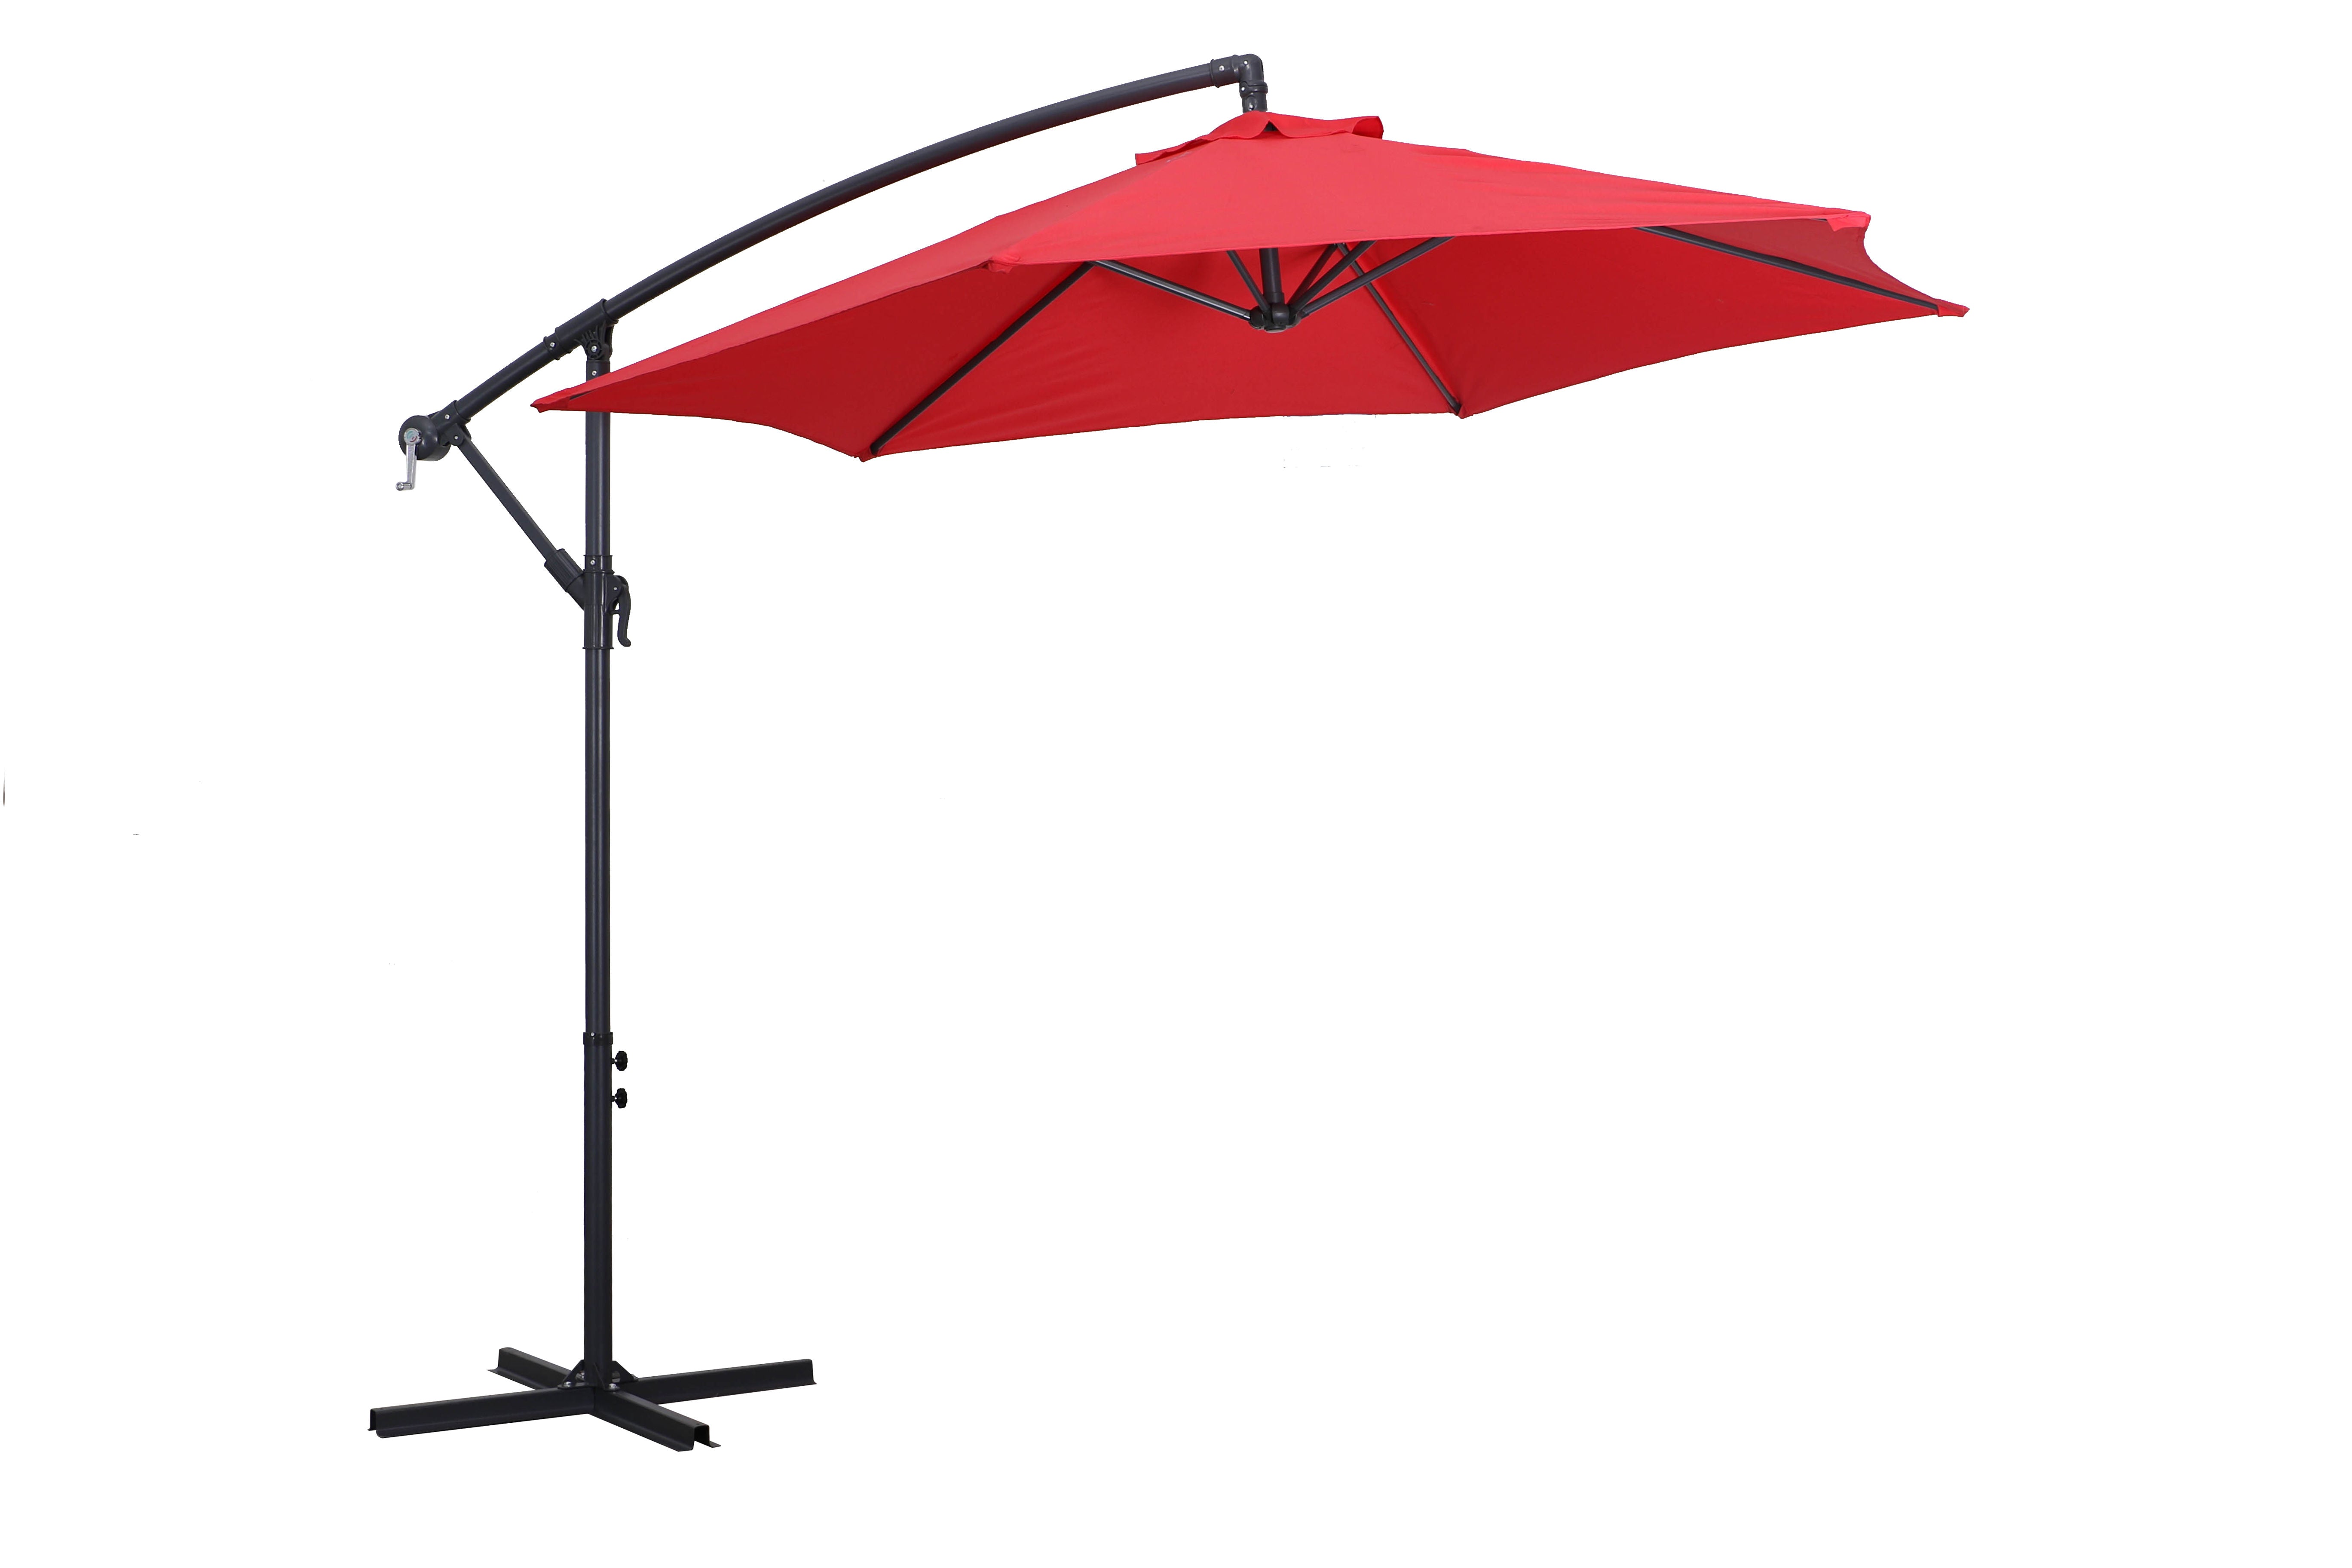 PatioZone 10' Tilting Offset Umbrella in UV-Protected Polyester (PZ-0501R) - Red